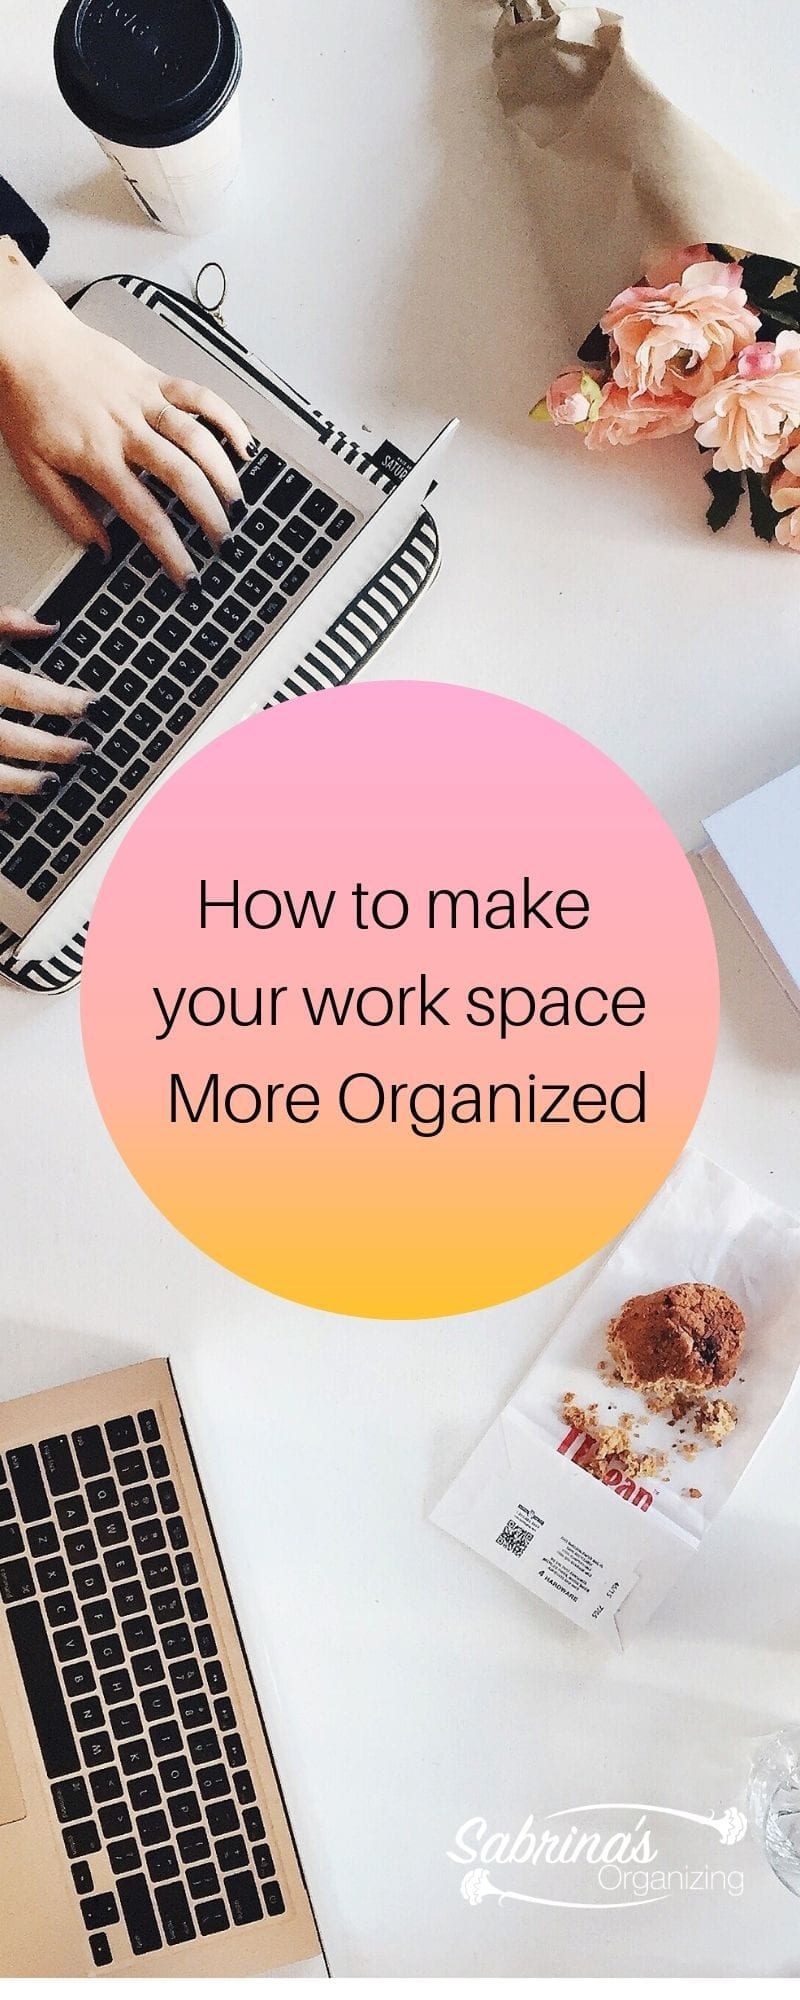 How to Make Your Workspace More Organized